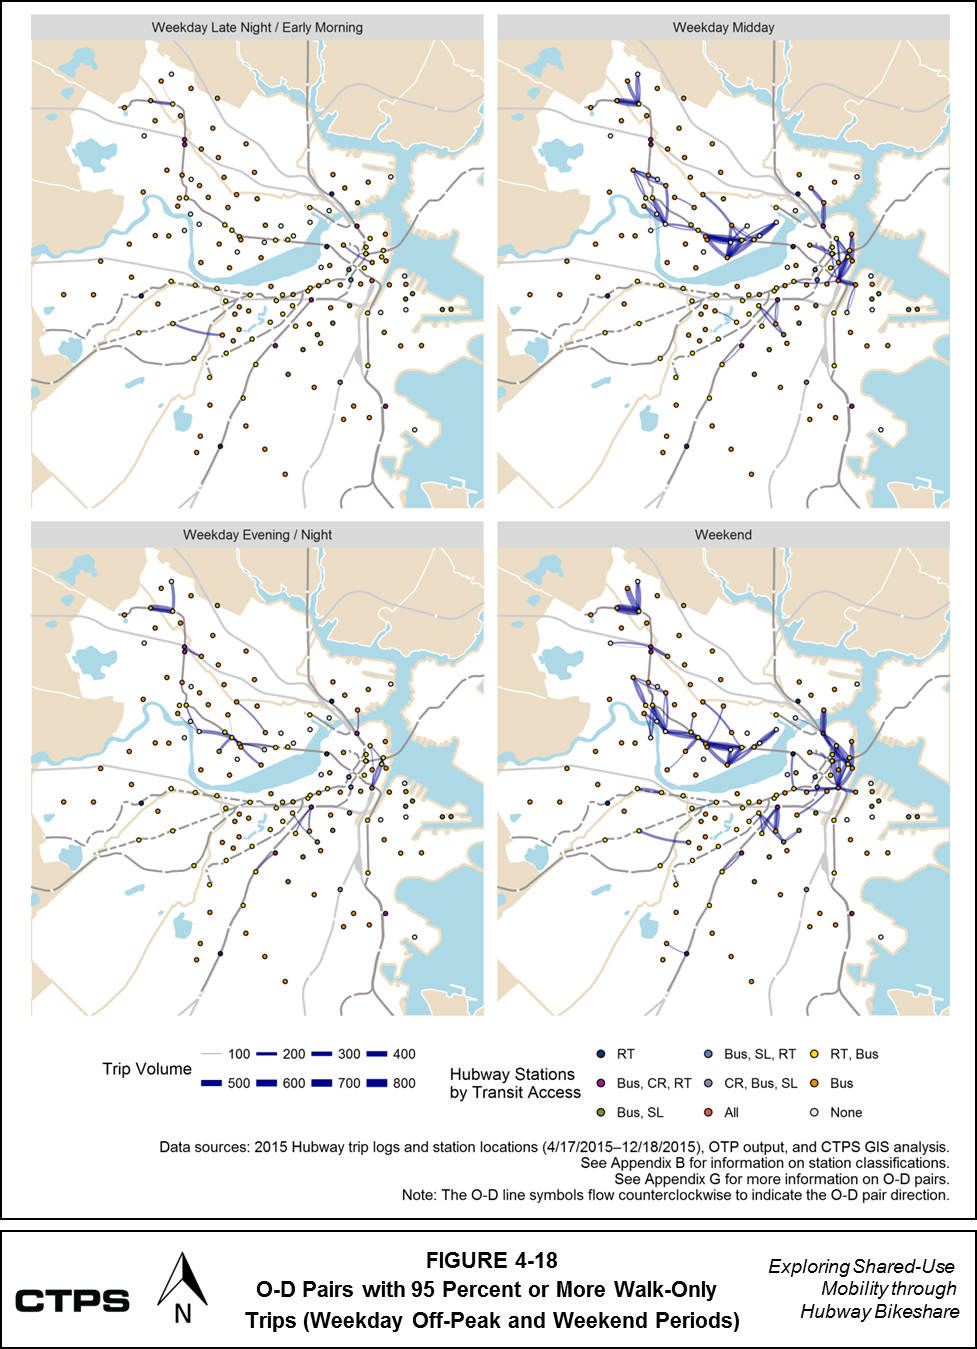 FIGURE 4-18: O-D Pairs with 95 Percent or More Walk-Only Trips (Weekday Off-Peak and Weekend Periods):  This series of four maps shows origin-destination (O-D) pairs of Hubway member trips. The first shows O-D pairs during the weekday late night/early morning period, the second shows O-D pairs during the weekday midday period, the third shows O-D pairs during the weekday evening/night period, and the fourth shows O-D pairs during weekend days. These O-D pairs are classified according to their trip volume. At least 95 percent of the trips in these pairs had “walk-only” travel itineraries generated by Open Trip Planner (OTP). More information about these O-D pairs is available in Appendix G. The maps also classify Hubway stations by the transit modes that are accessible within 200 meters.